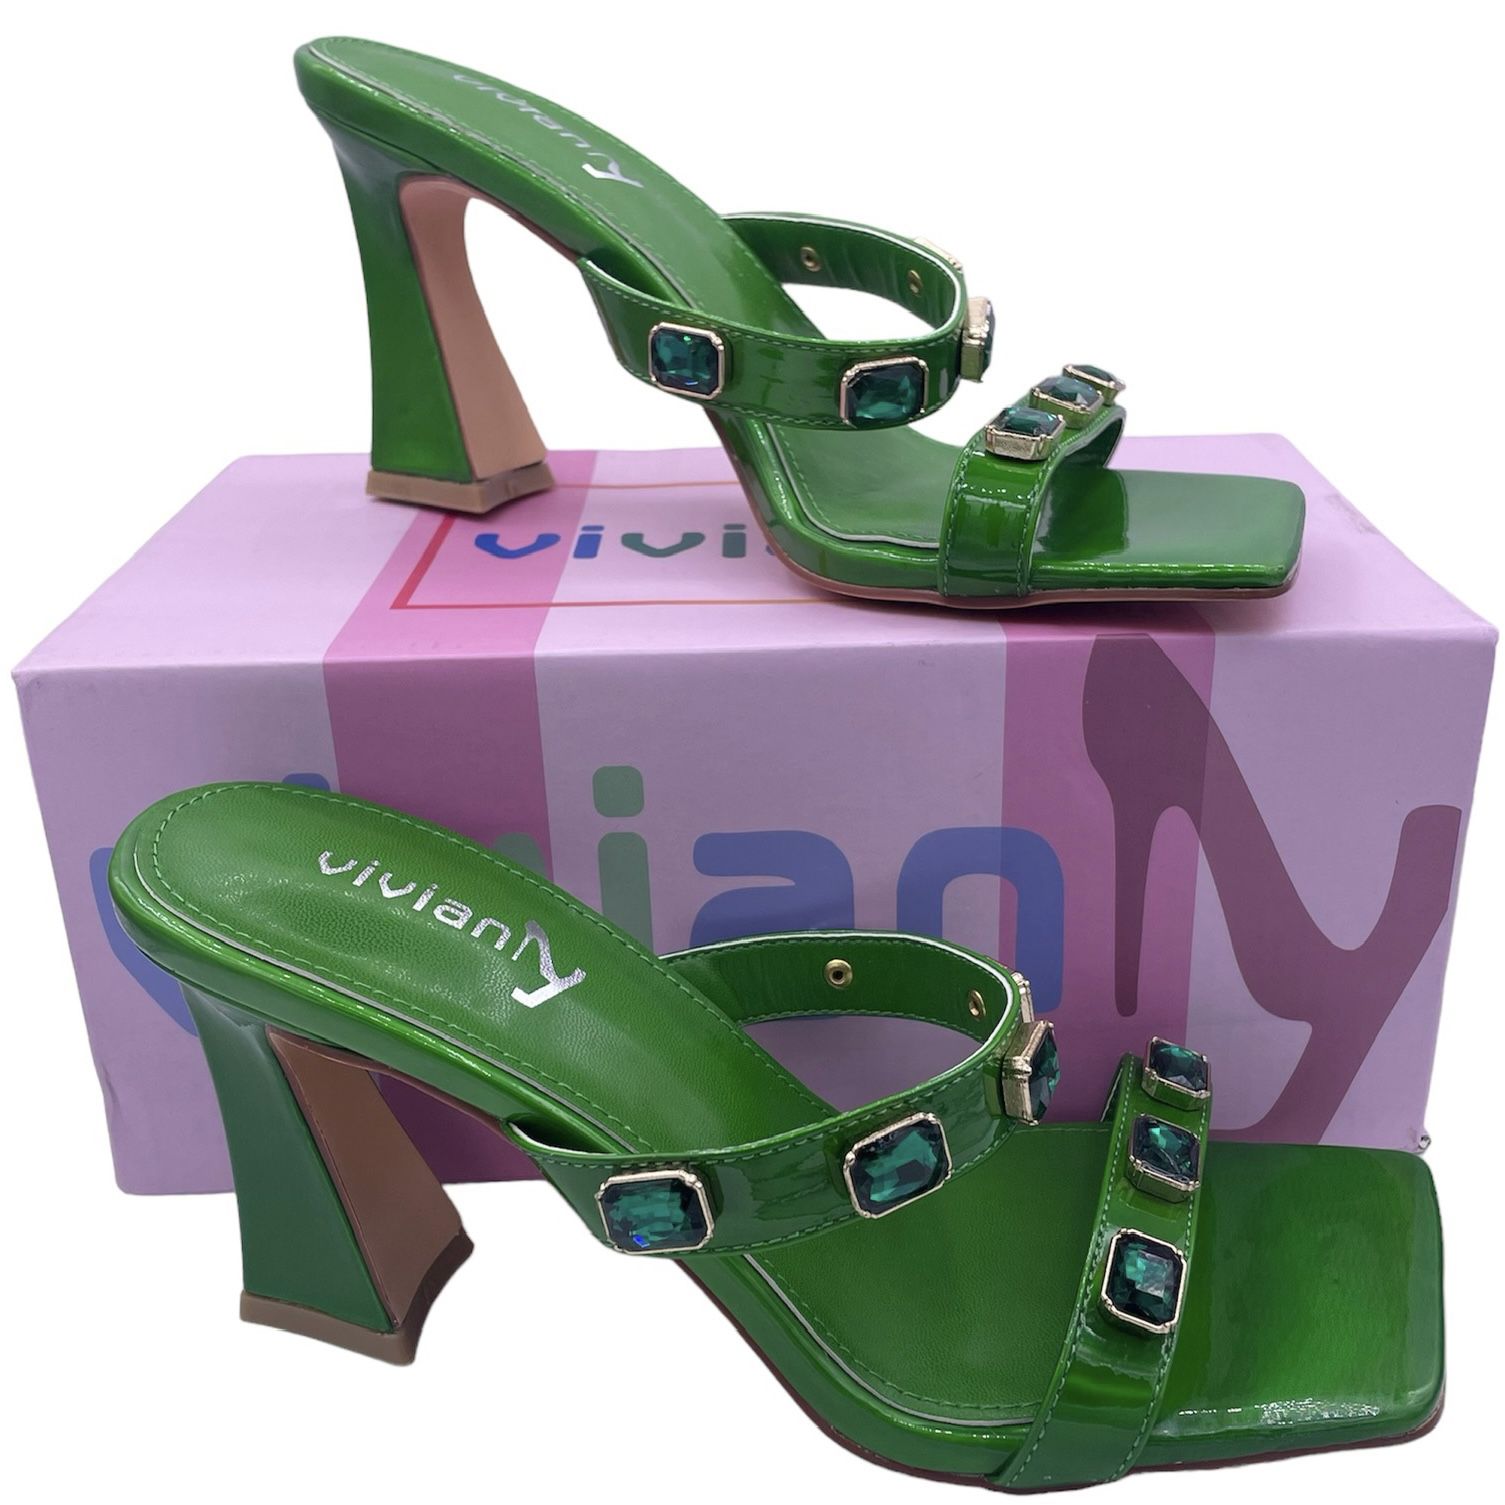 Vivianly squared open toe green heeled sandals diamond detail Size 6